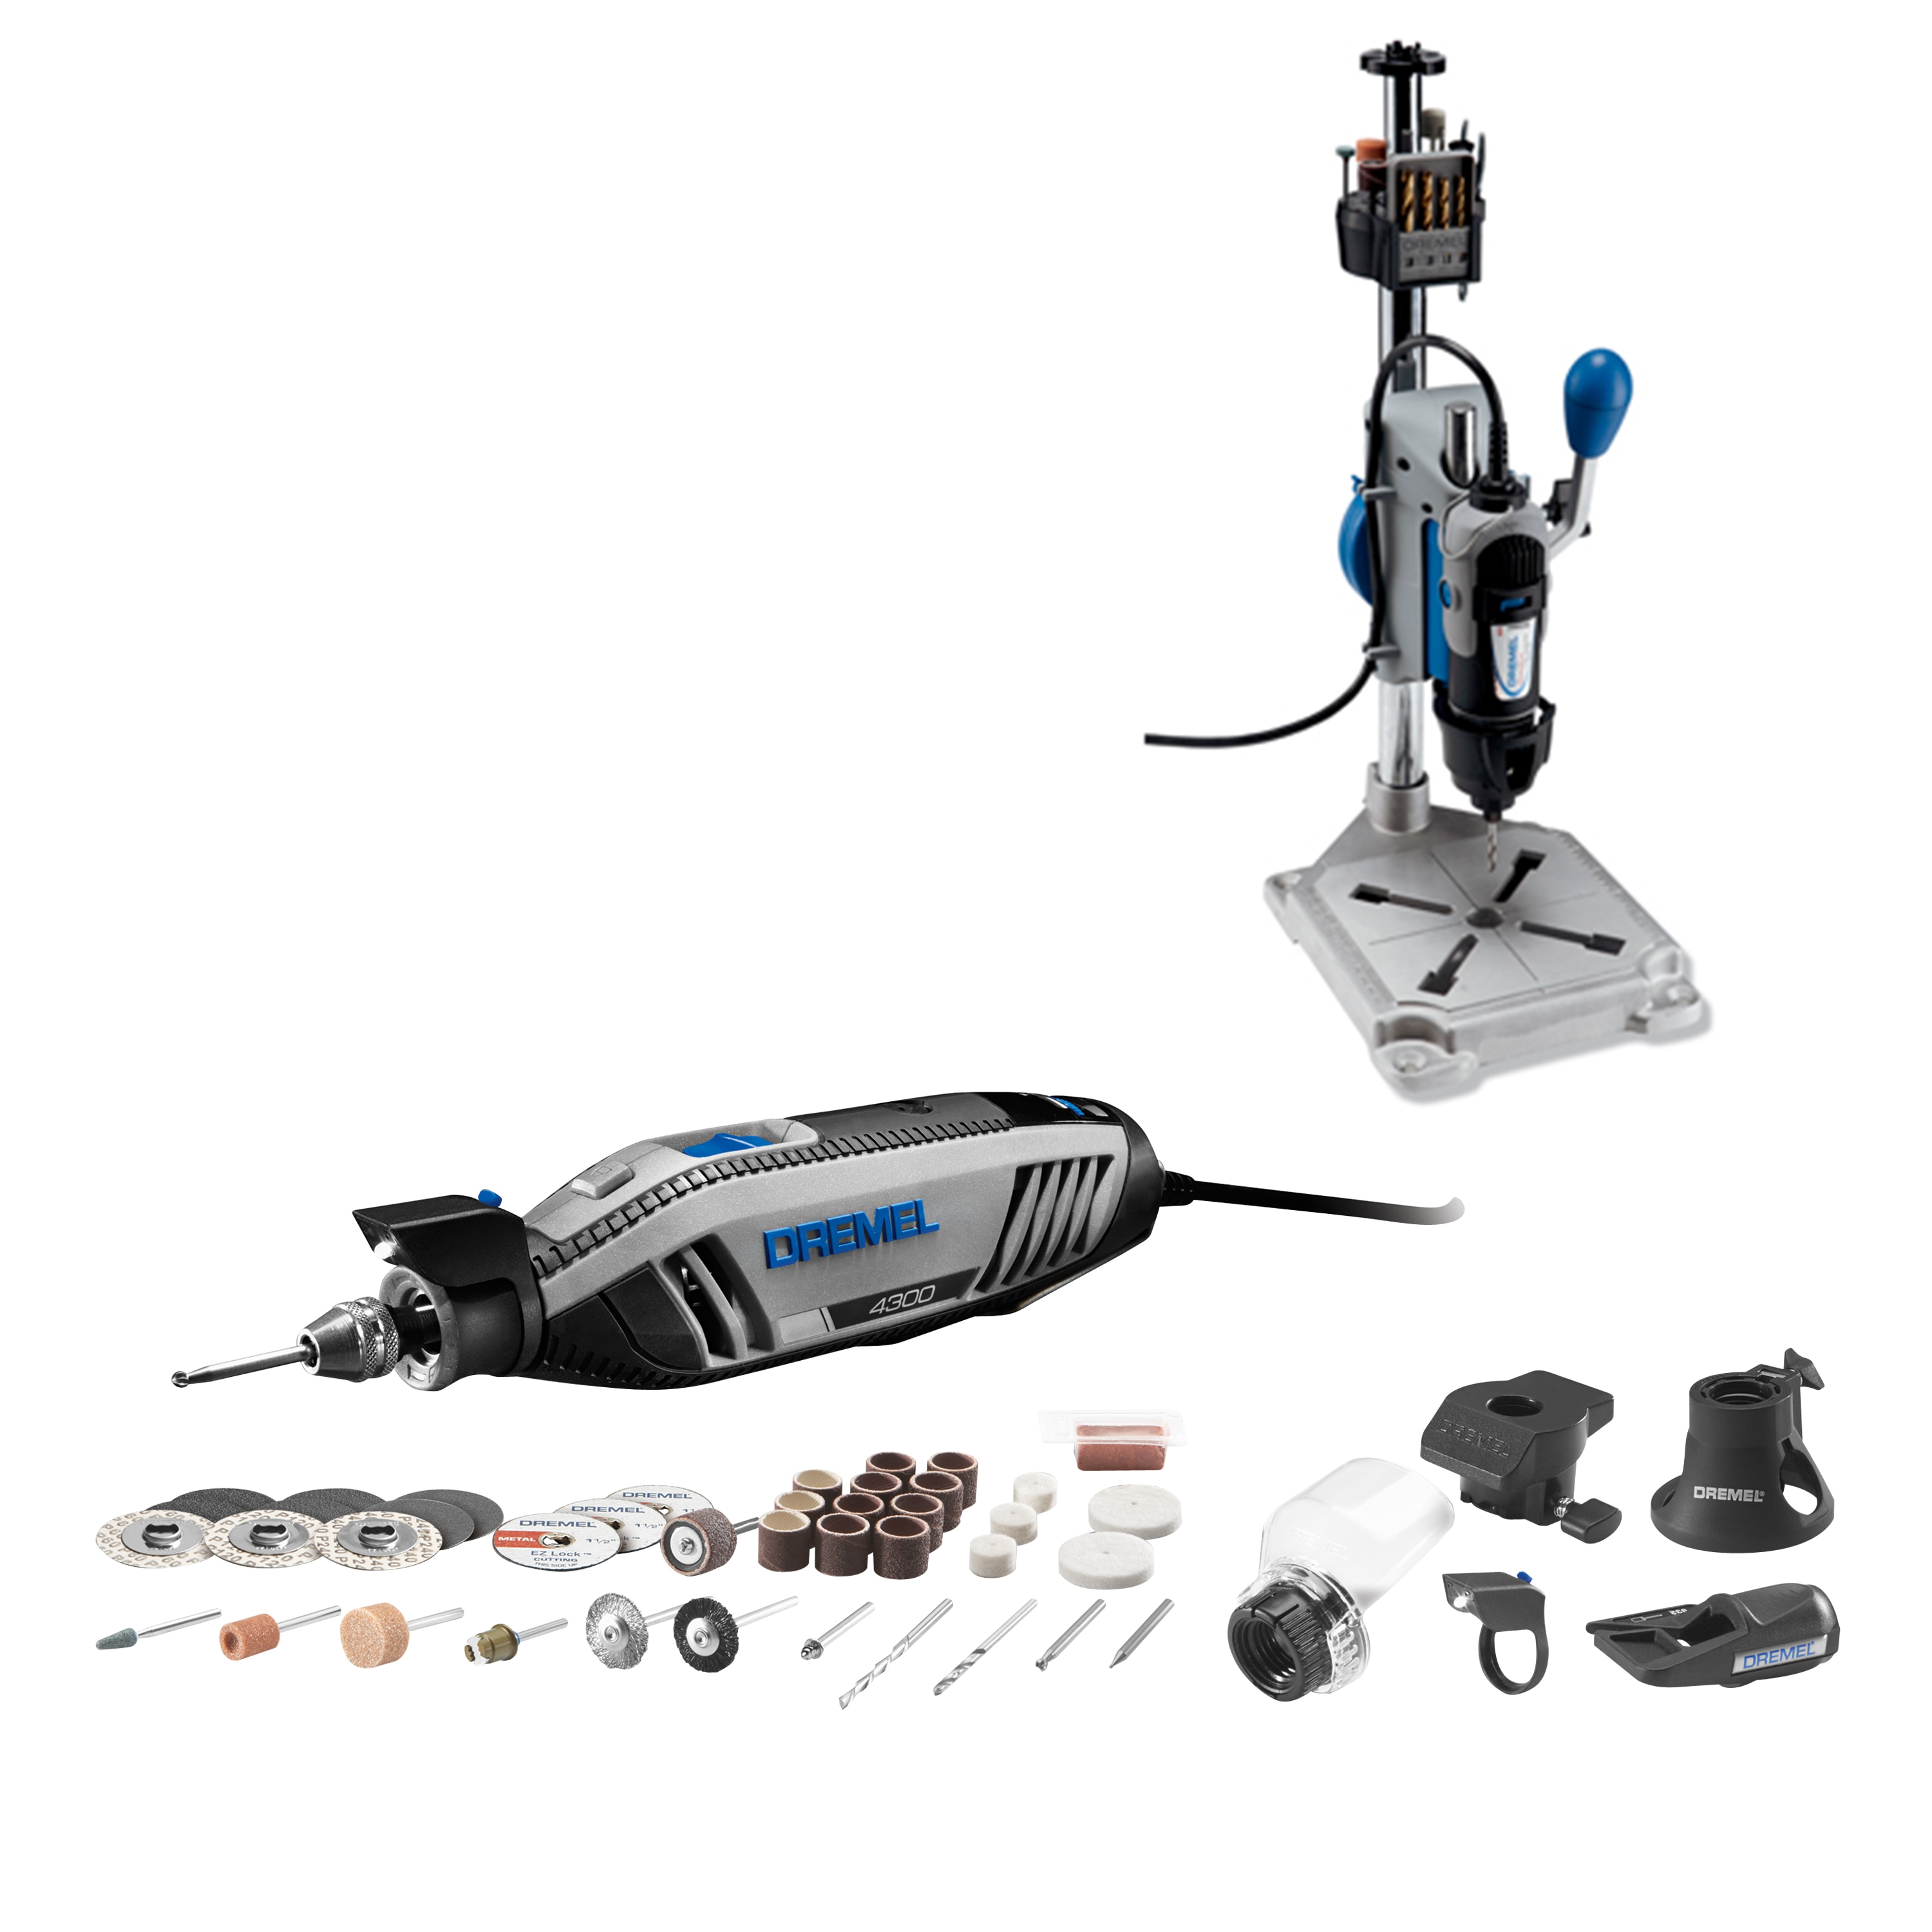 Dremel 4000 Corded Variable Speed Rotary Tool with 4 Attachments and 34  Accessories + Flex Shaft Attachment